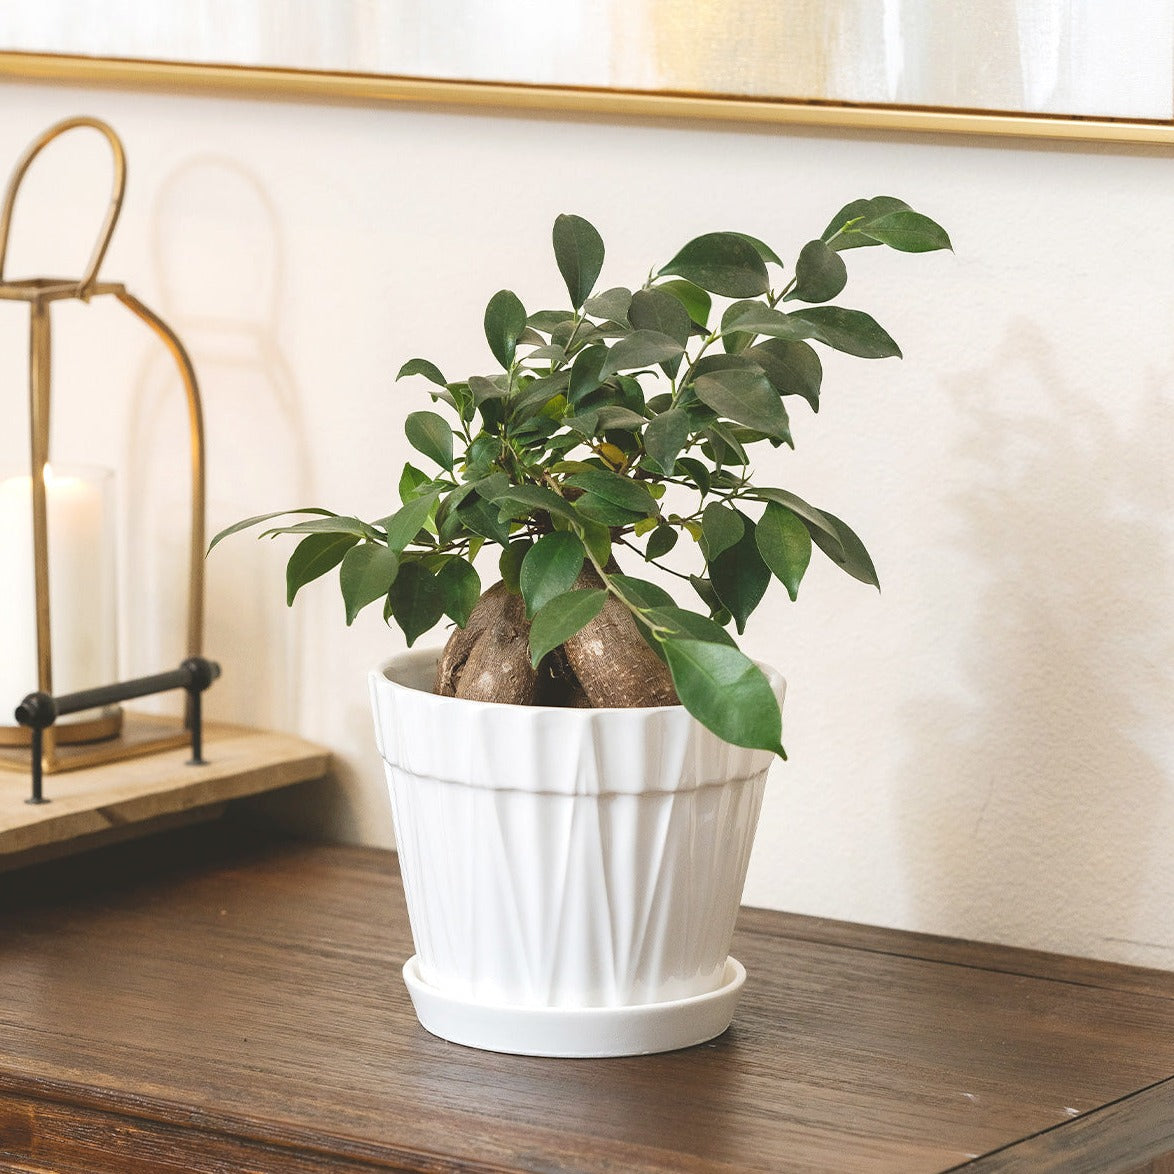 Ficus Ginseng, live 6 inch Ficus Ginseng in decorative pot, buy Ficus Ginseng online, Ficus Ginseng sale online, houseplant decor ideas